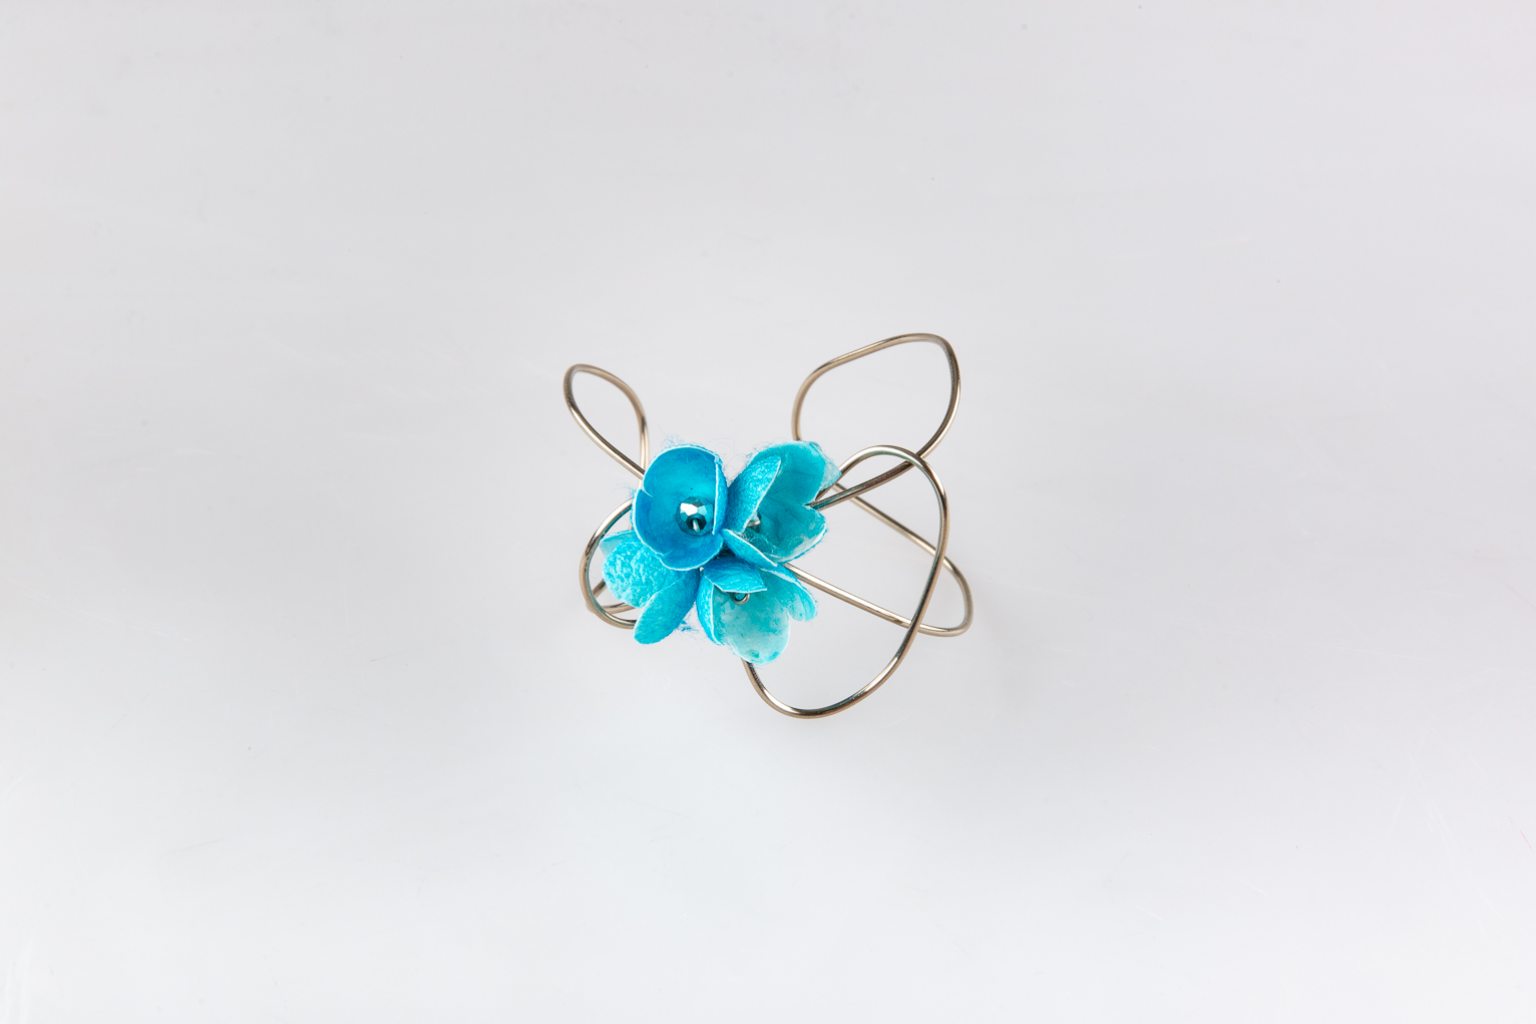 Cuff bracelet with turquoise silk poppies